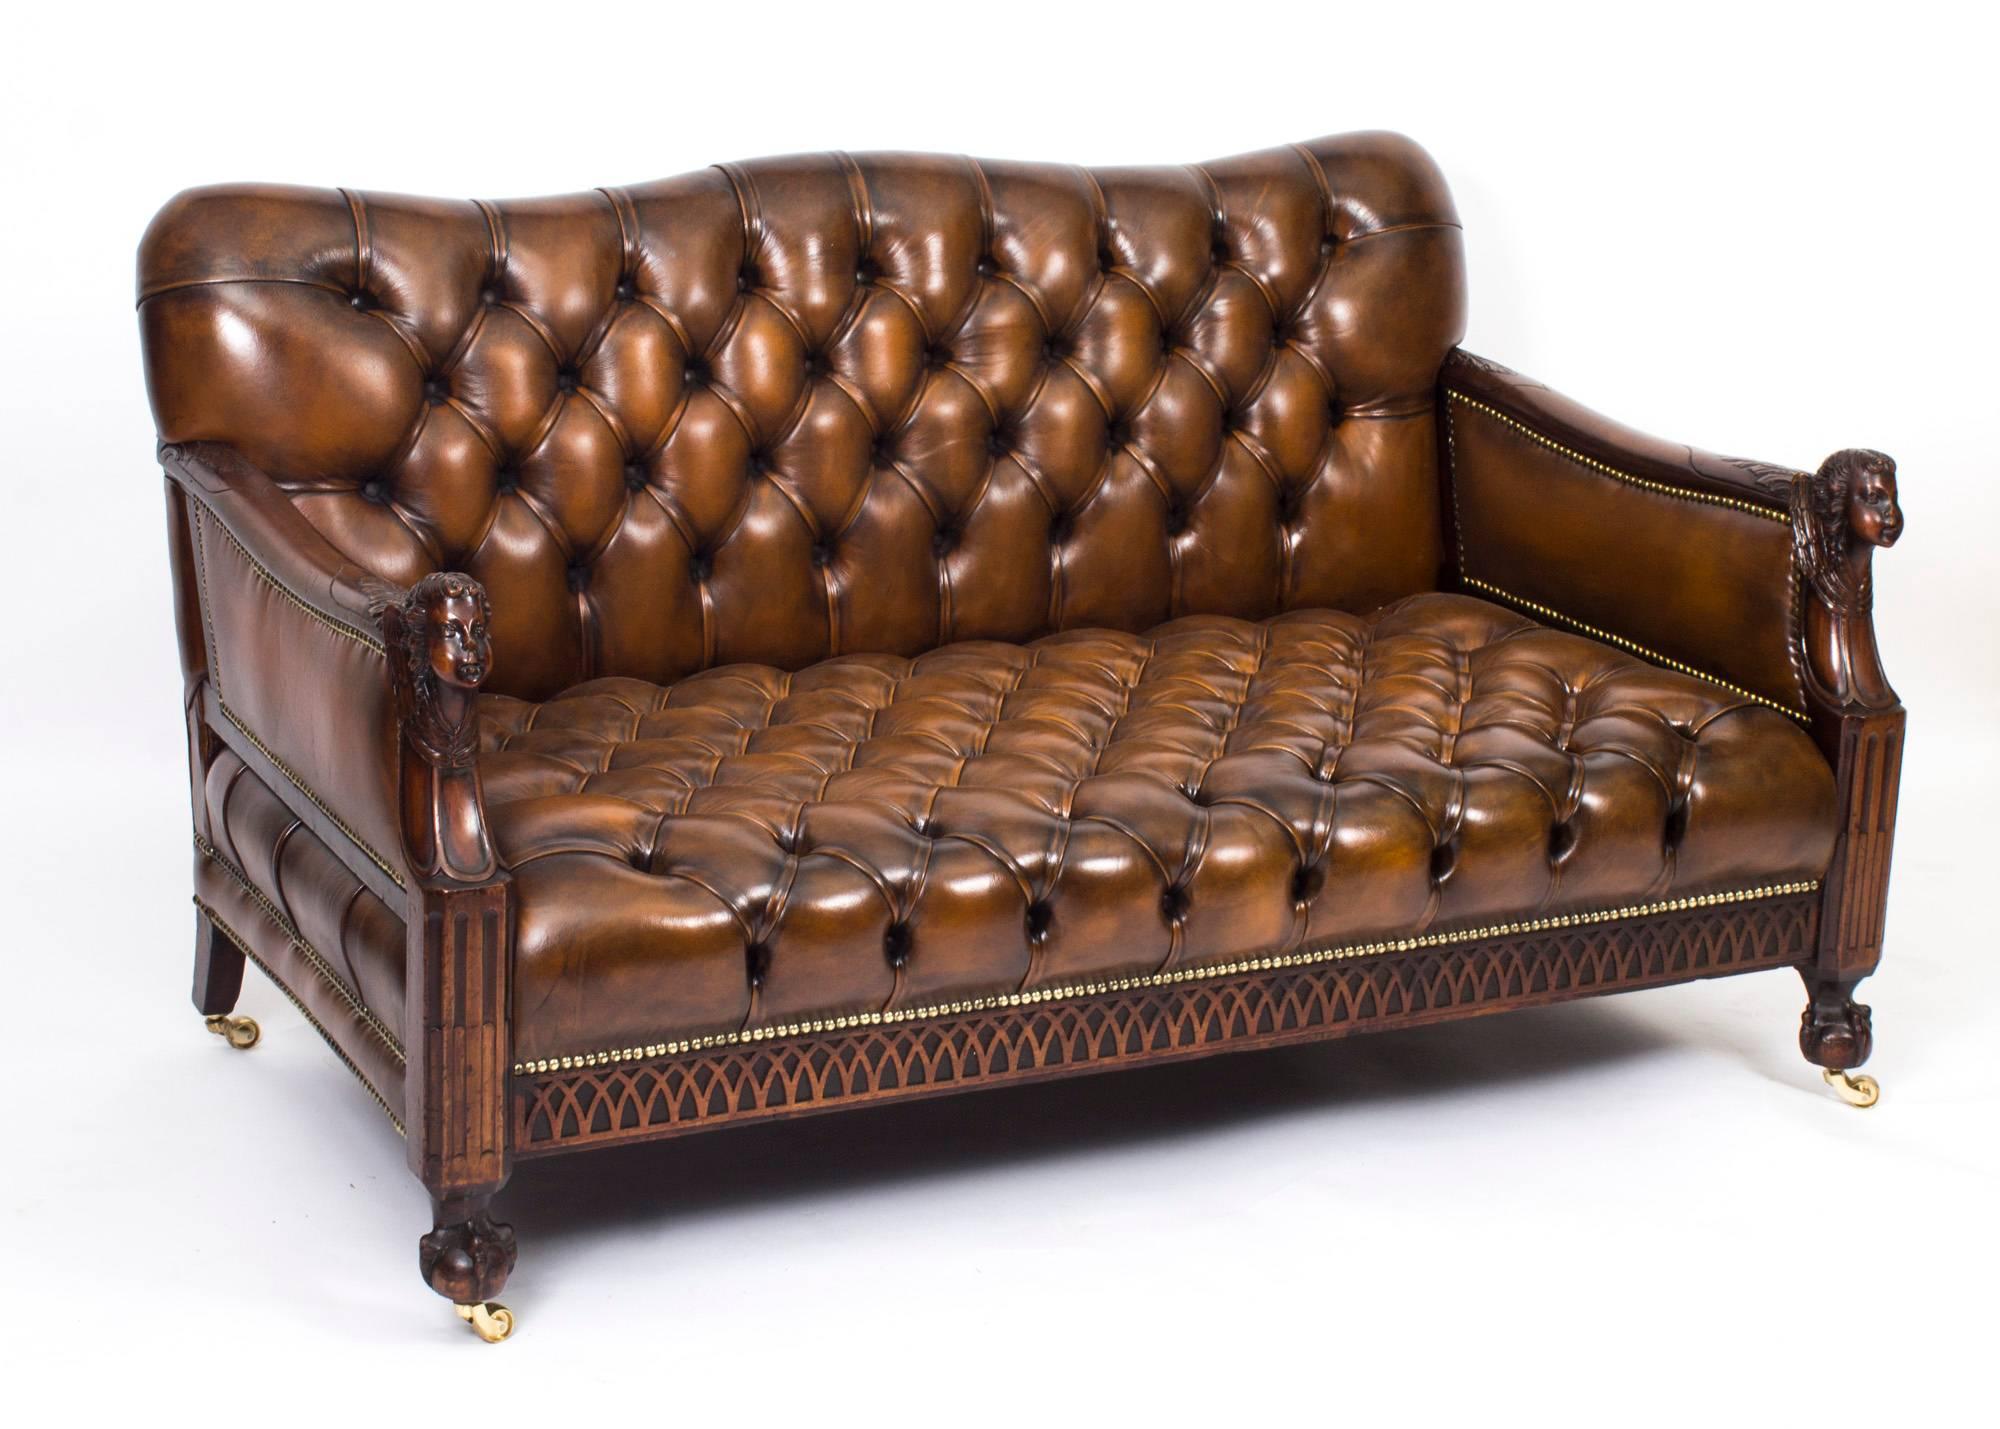 This is a superb antique English Victorian salon suite, comprising a sofa with the matching pair of armchairs, circa 1880 in date.

This suite was made from masterly crafted hand carved solid walnut.

The shape swayed button backs and seats are